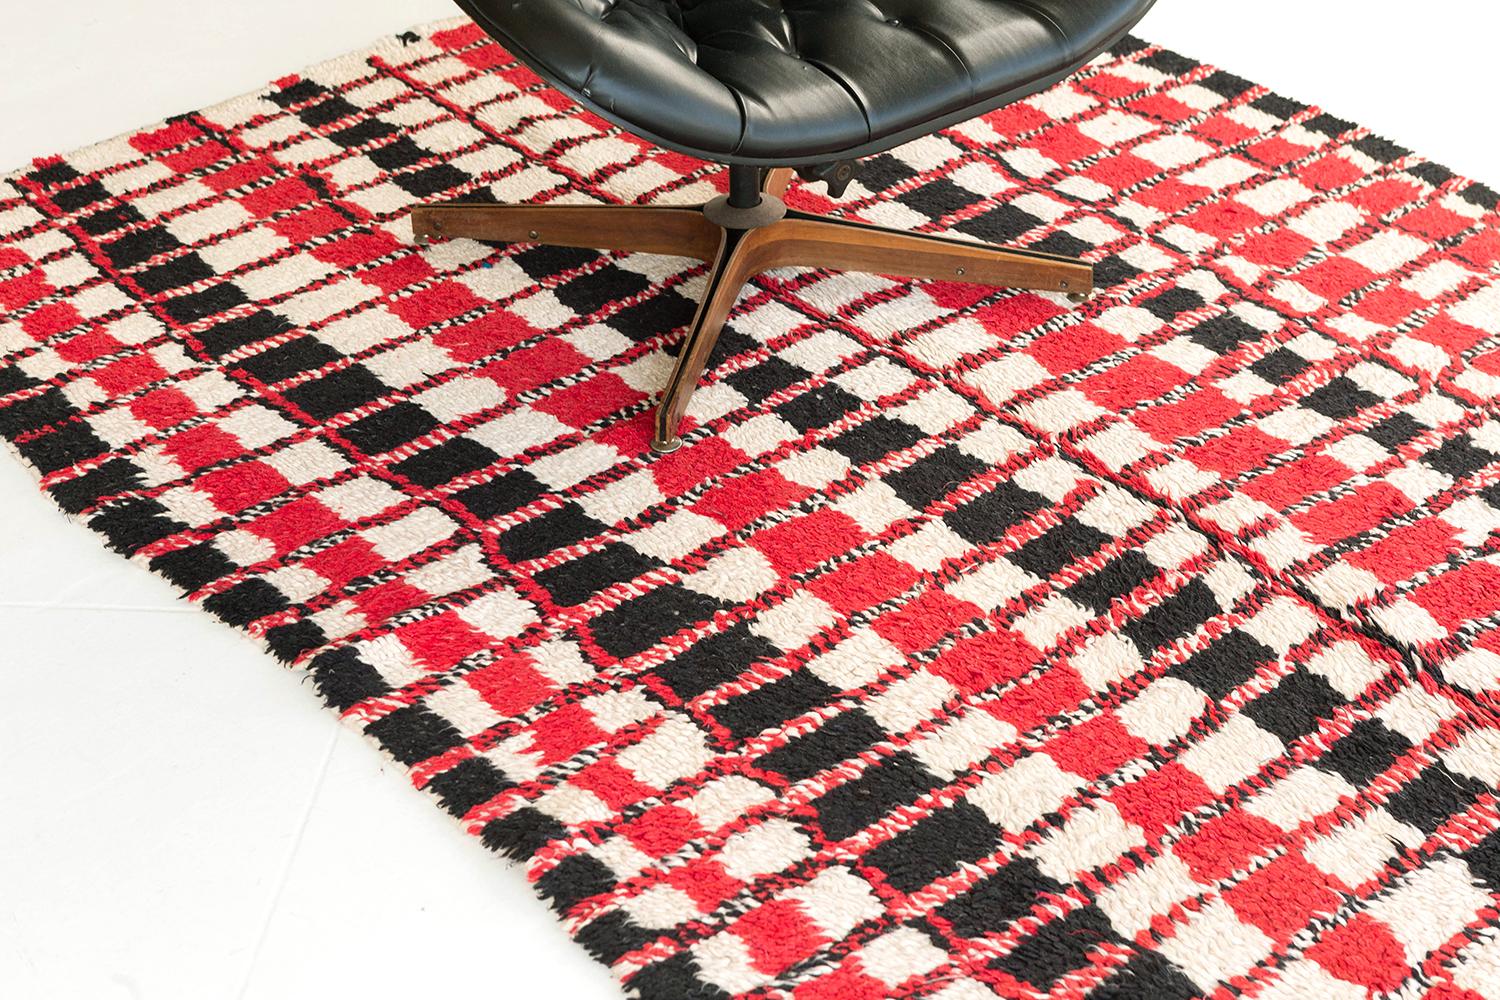 A magnificent vintage Moroccan rug of Azilal Tribe in Atlas Collection that features the stunning tones of ivory, charcoal and salmon red. A high-impact irregular sized checkerboard pattern decorates the field that was resulted from the